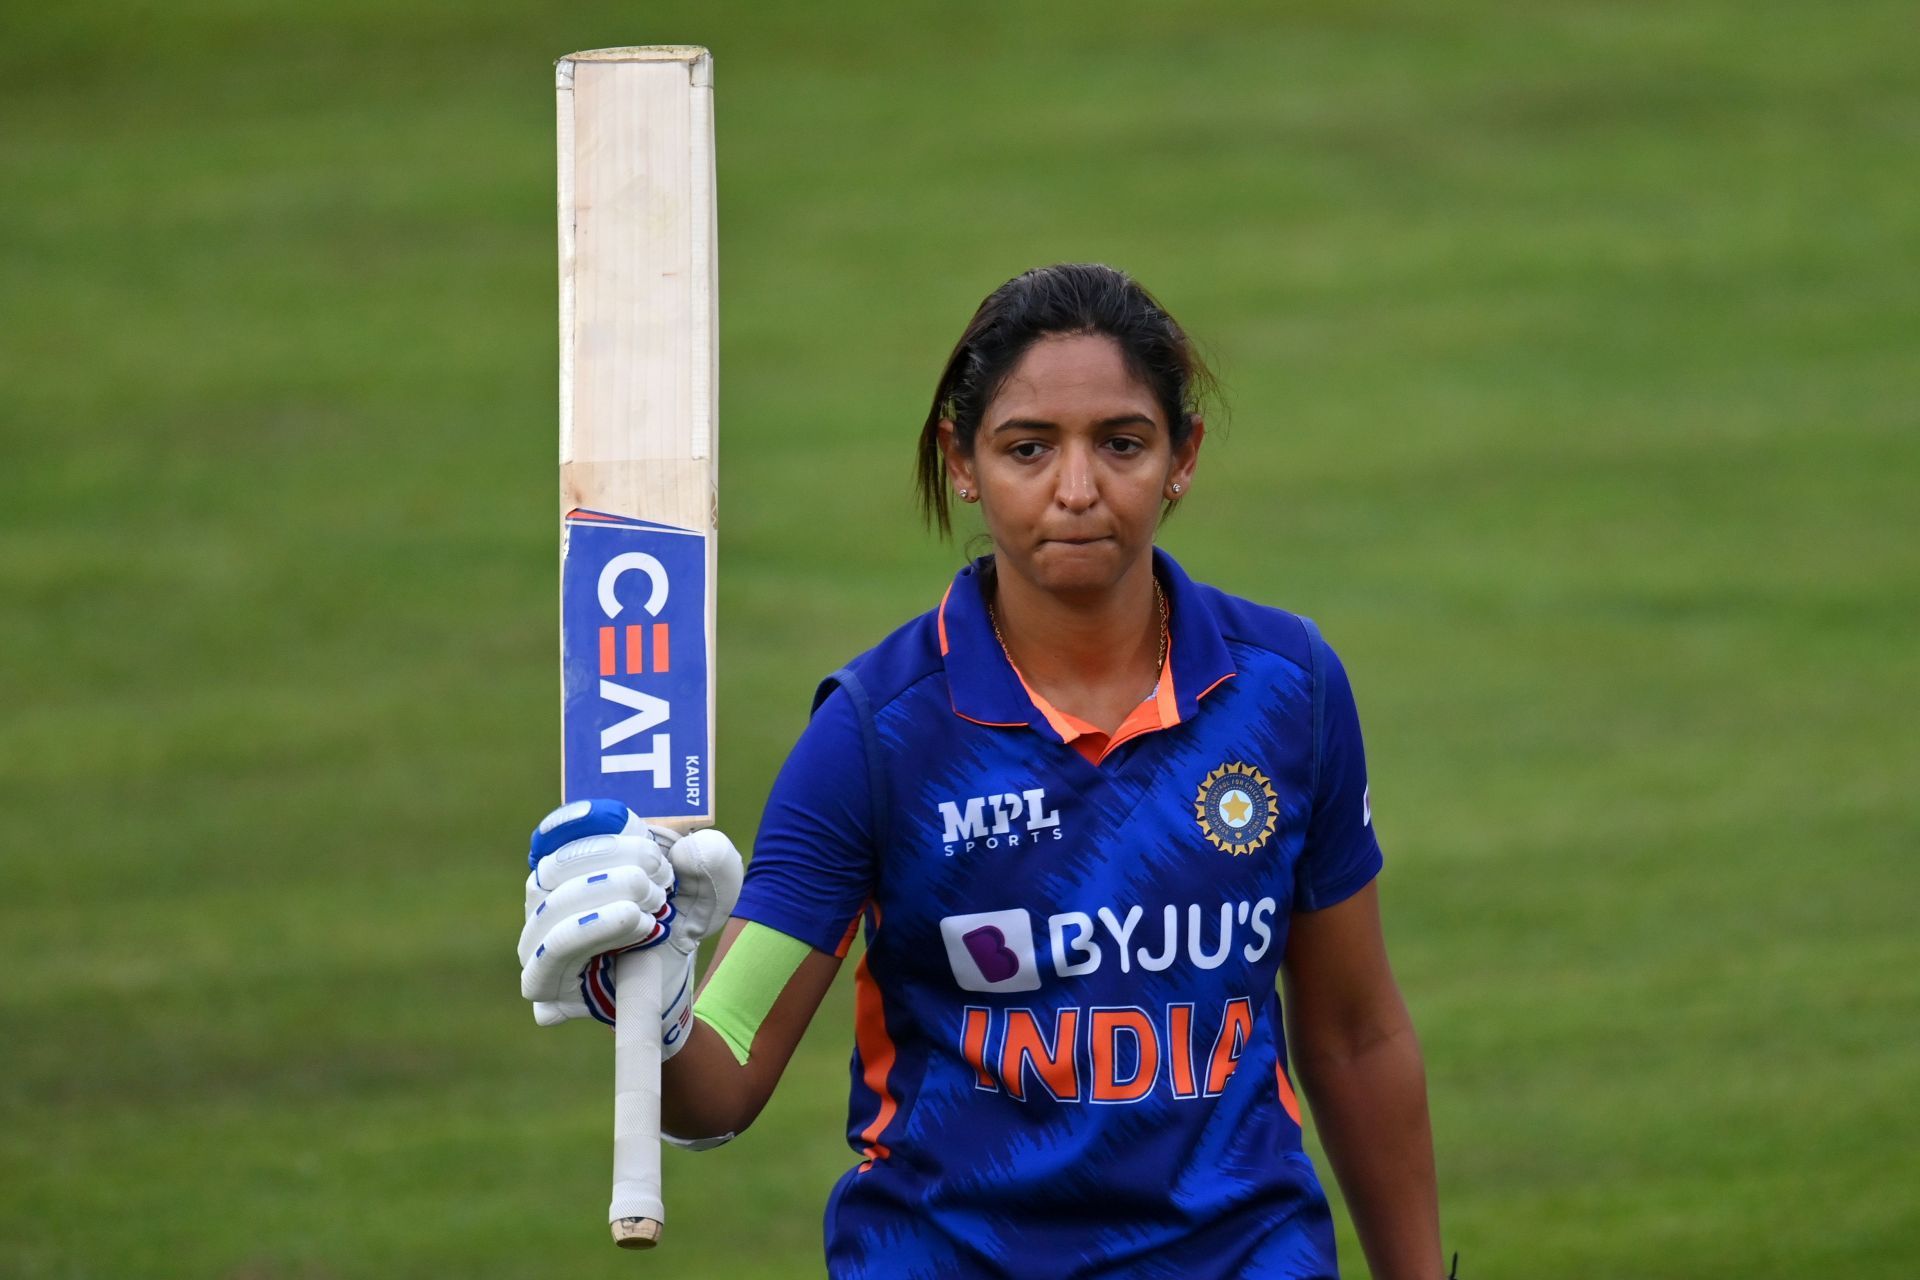 Harmanpreet Kaur will be one of the Indian players to watch out for at WBBL 2022